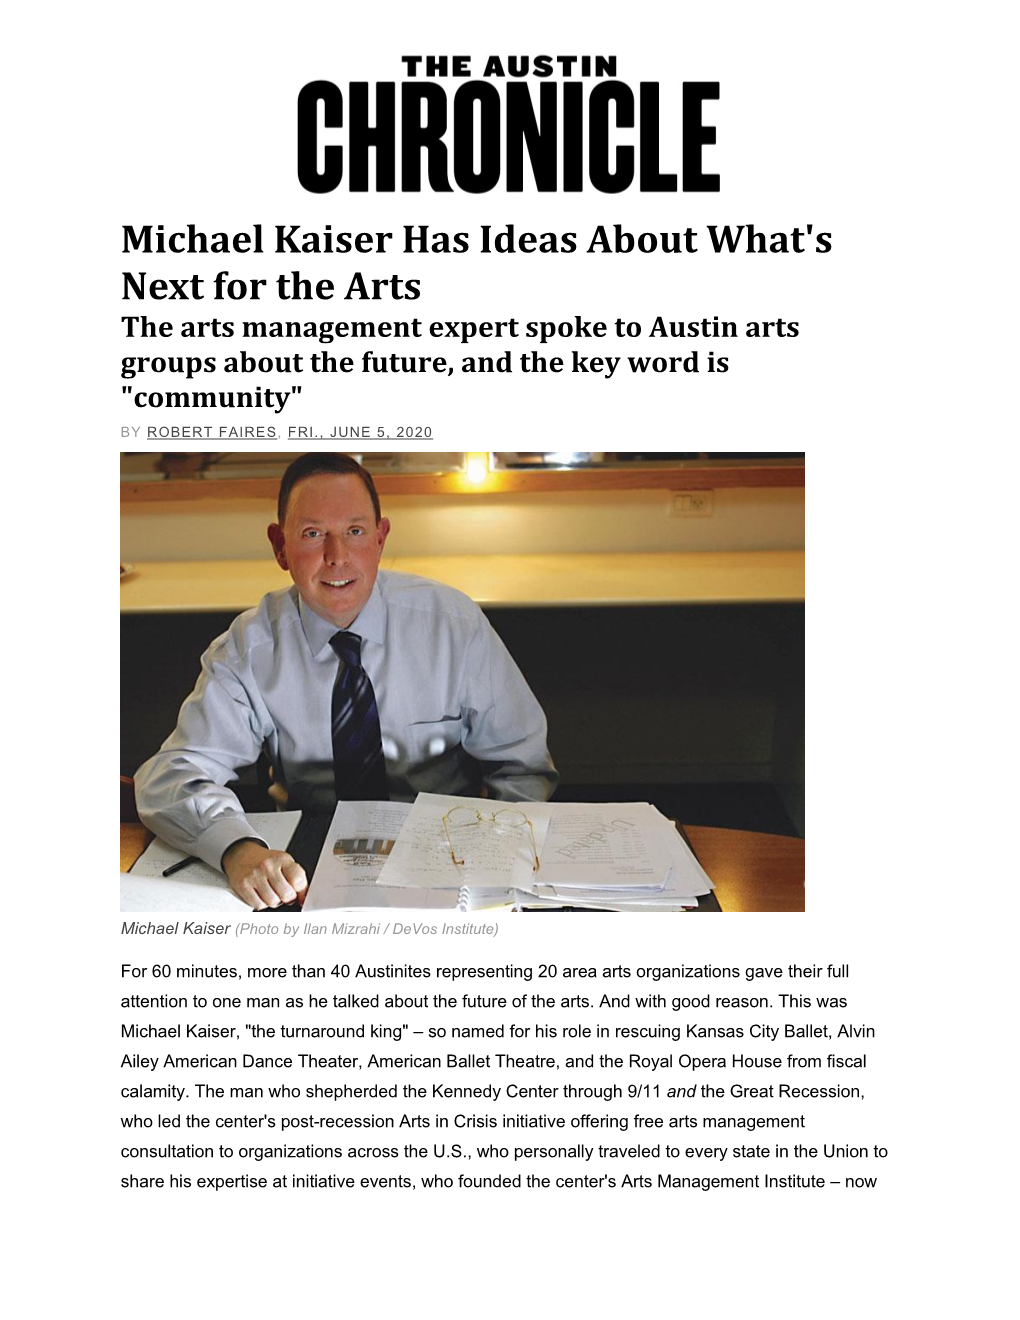 Michael Kaiser Has Ideas About What's Next for the Arts